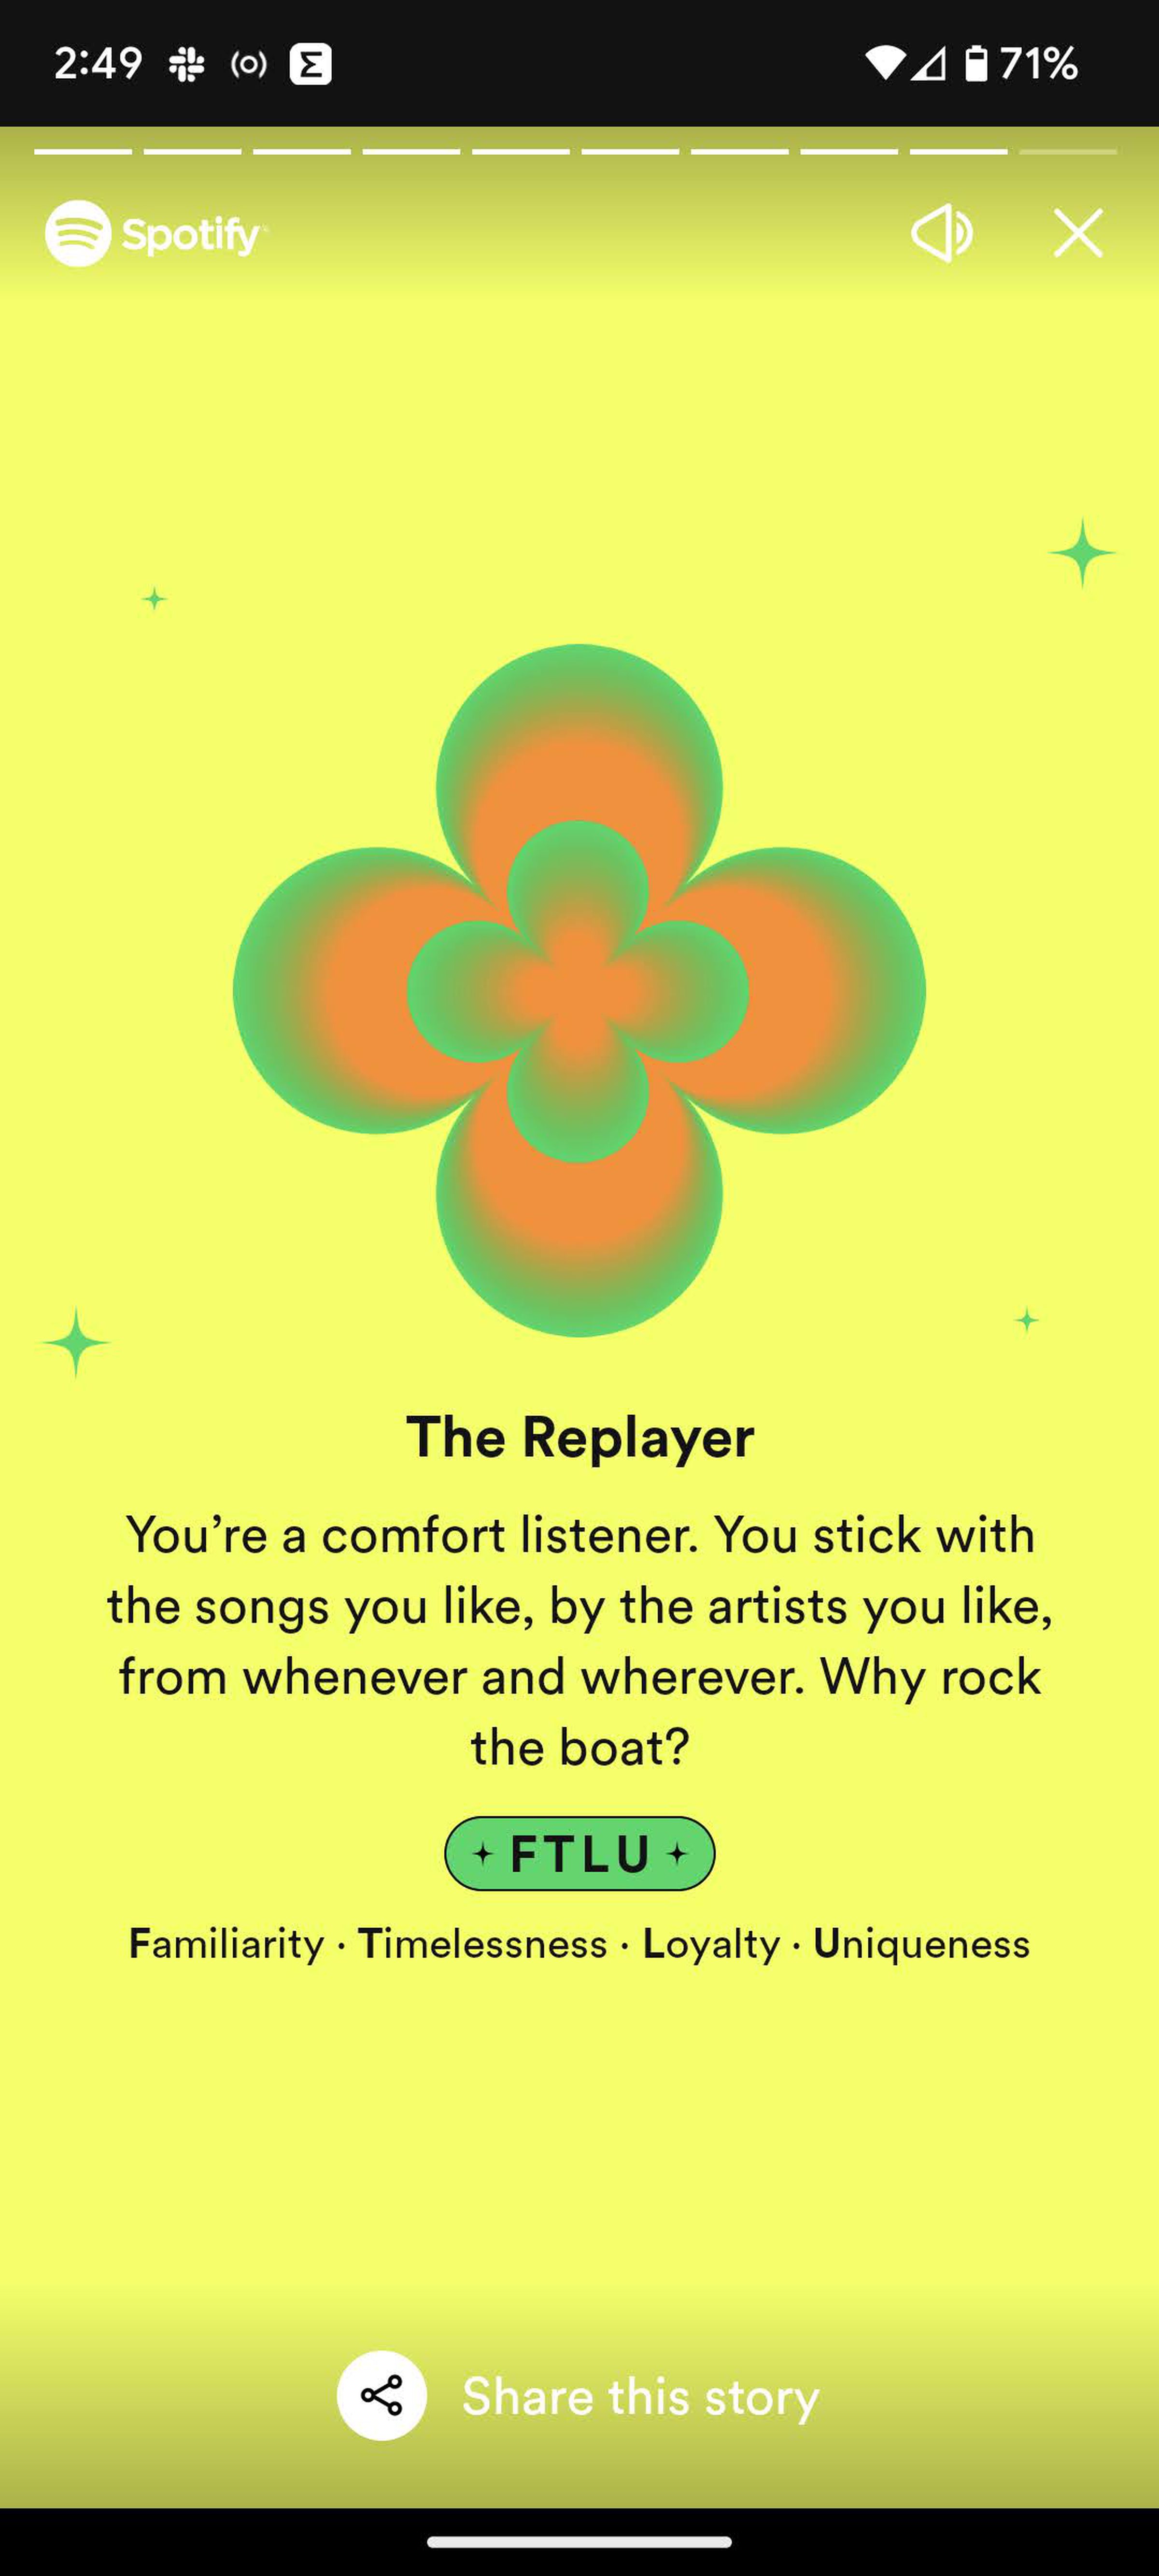 Text describing “The Replayer” with an orange and green abstract flower against a yellow background.